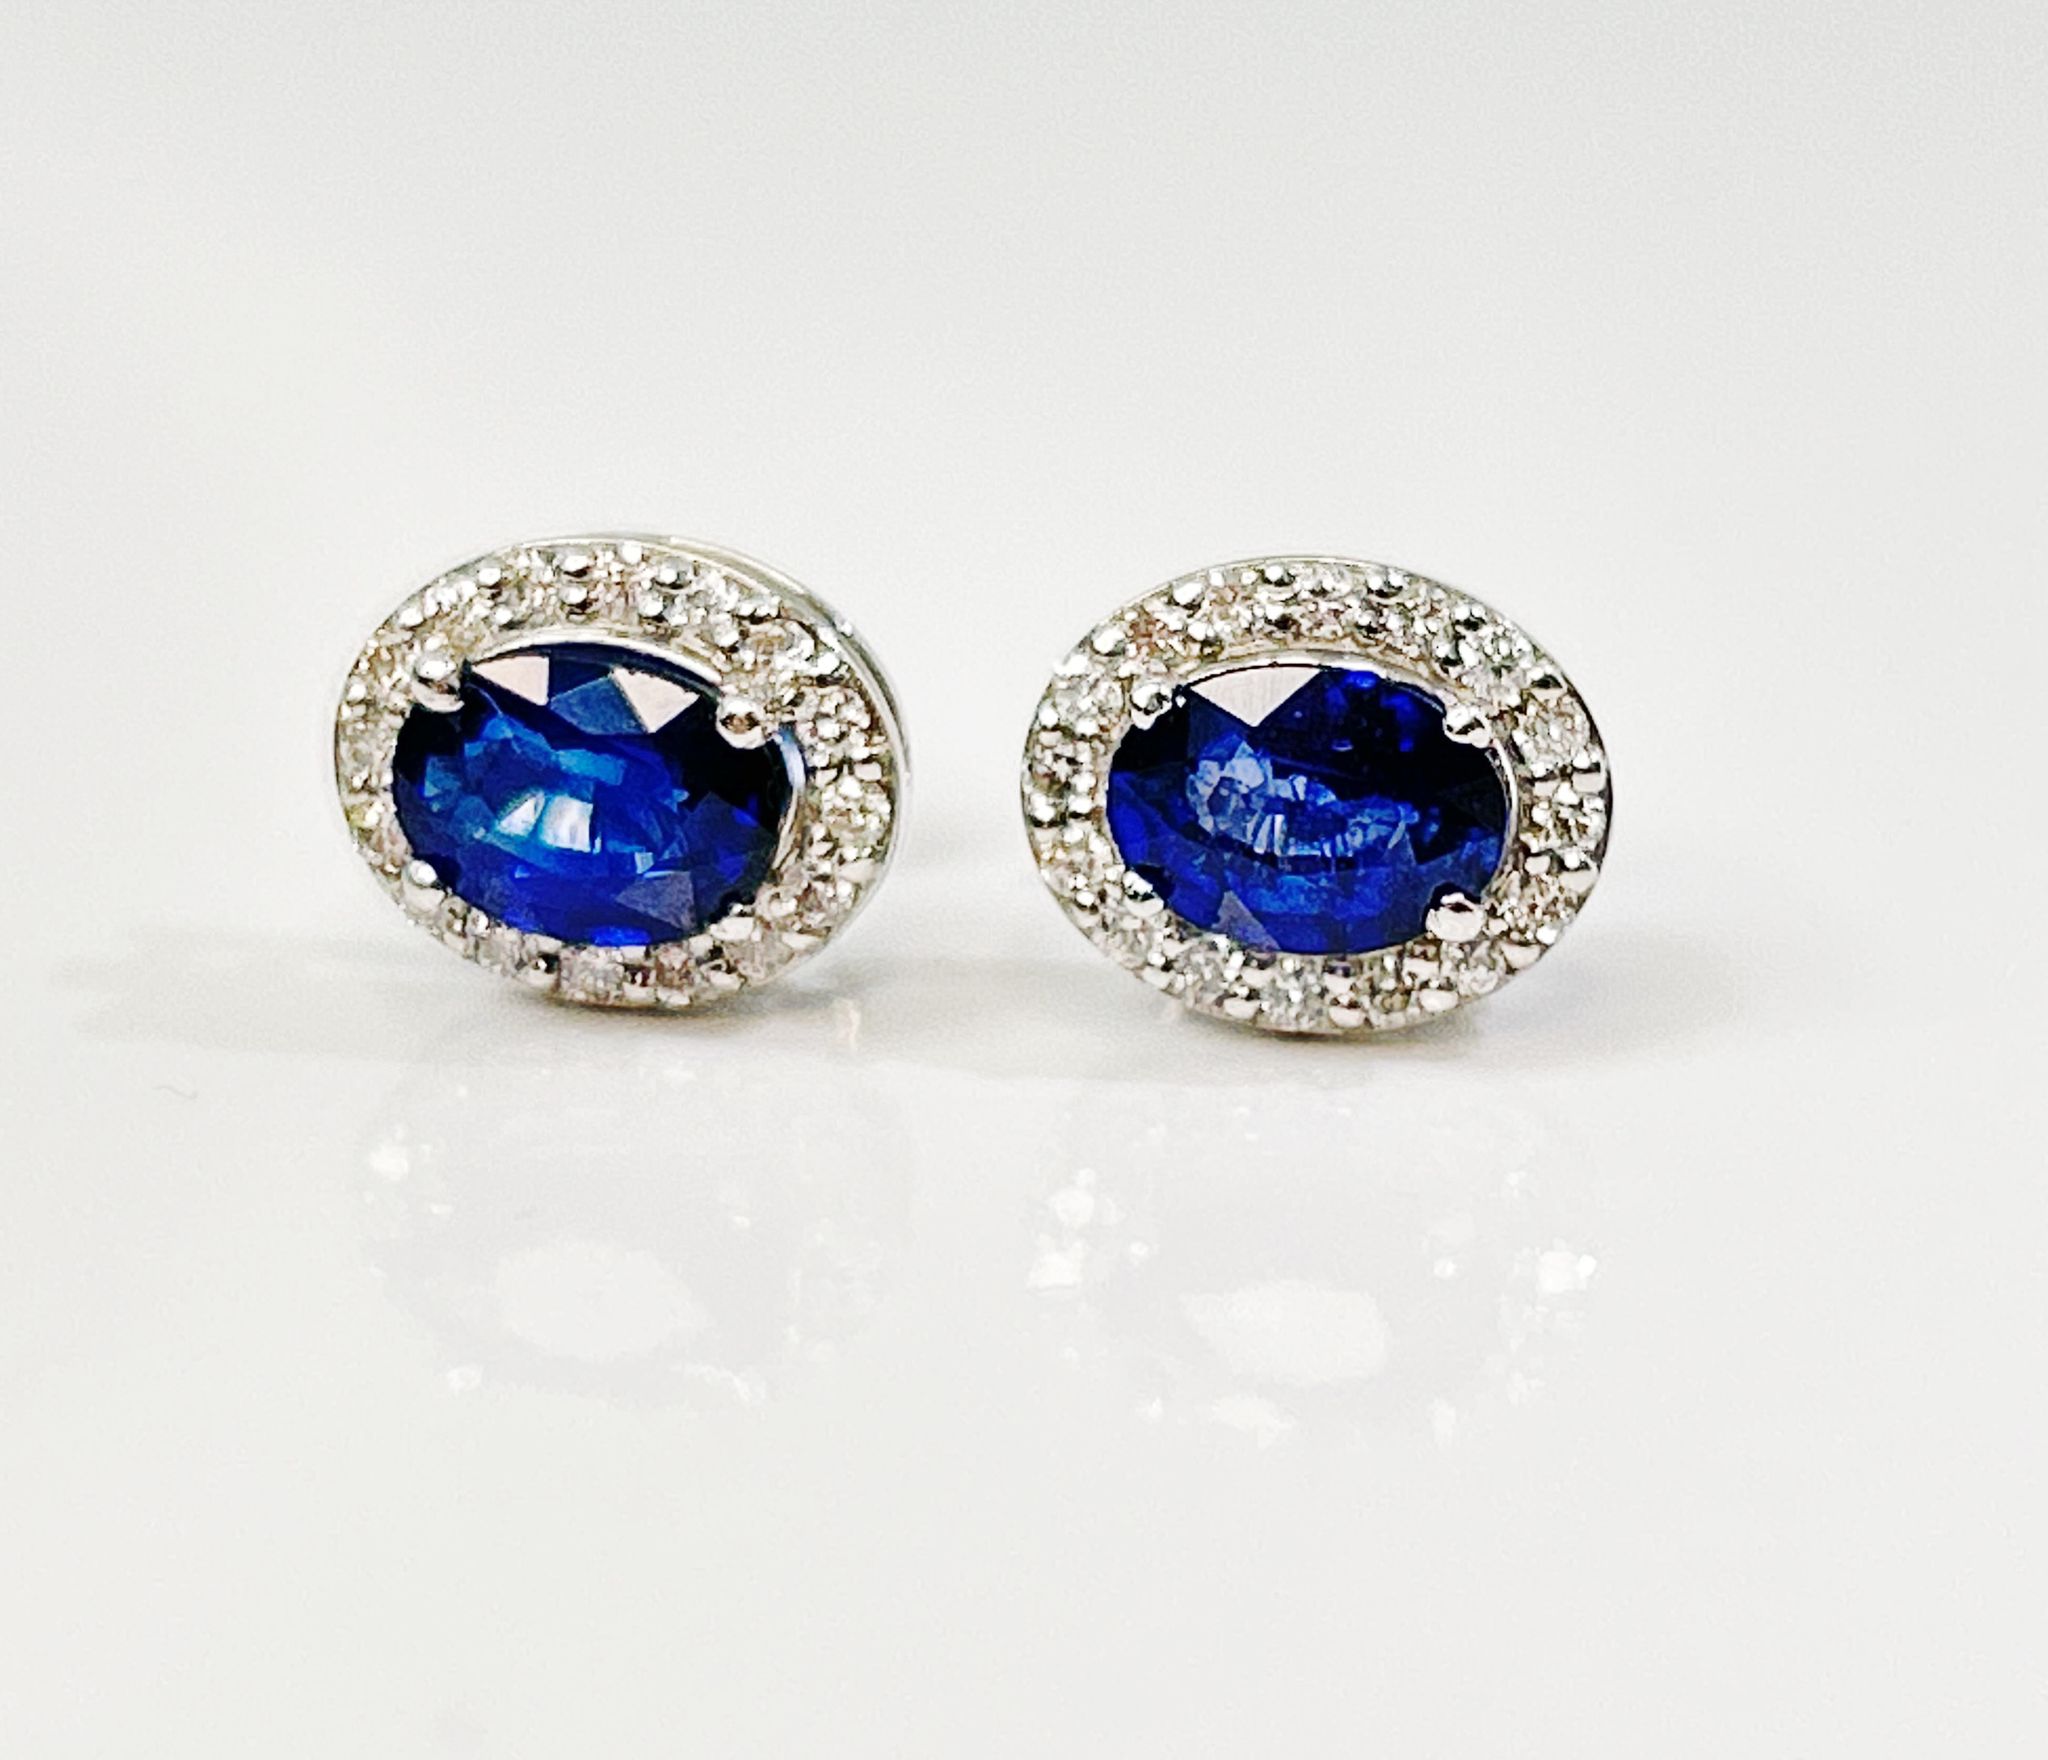 Beautiful Natural Unheated Blue Sapphire earrings with diamonds & Platinum - Image 2 of 7